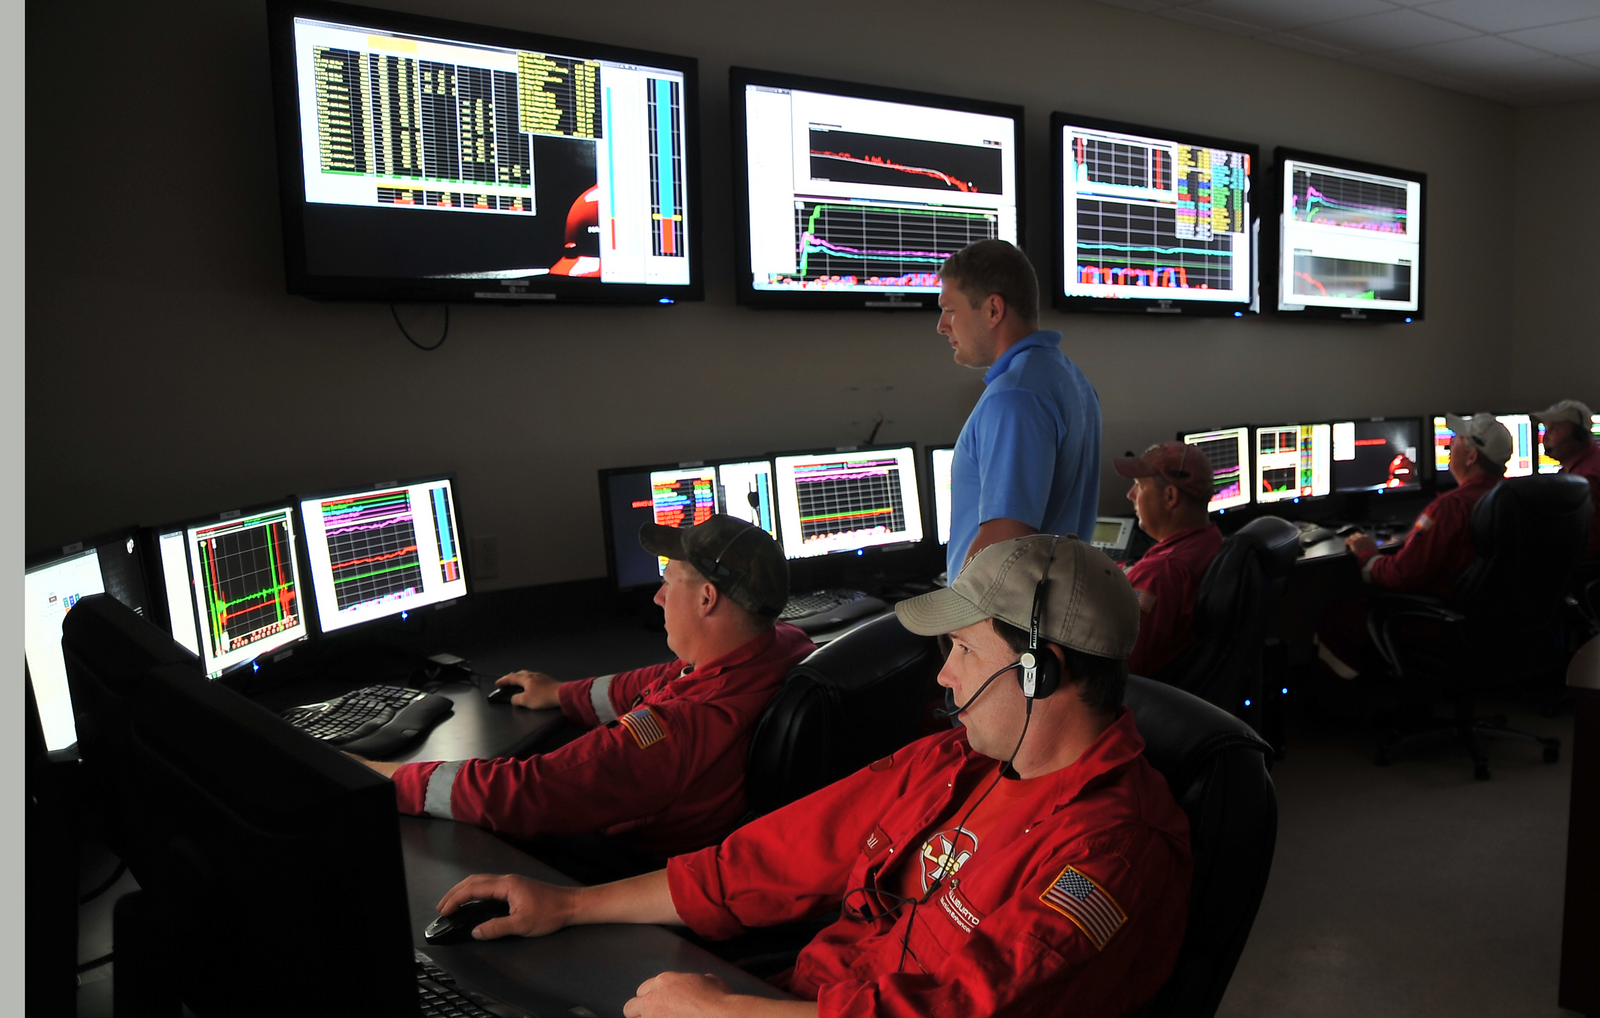 Four halliburton engineers looking at the data on the screen.